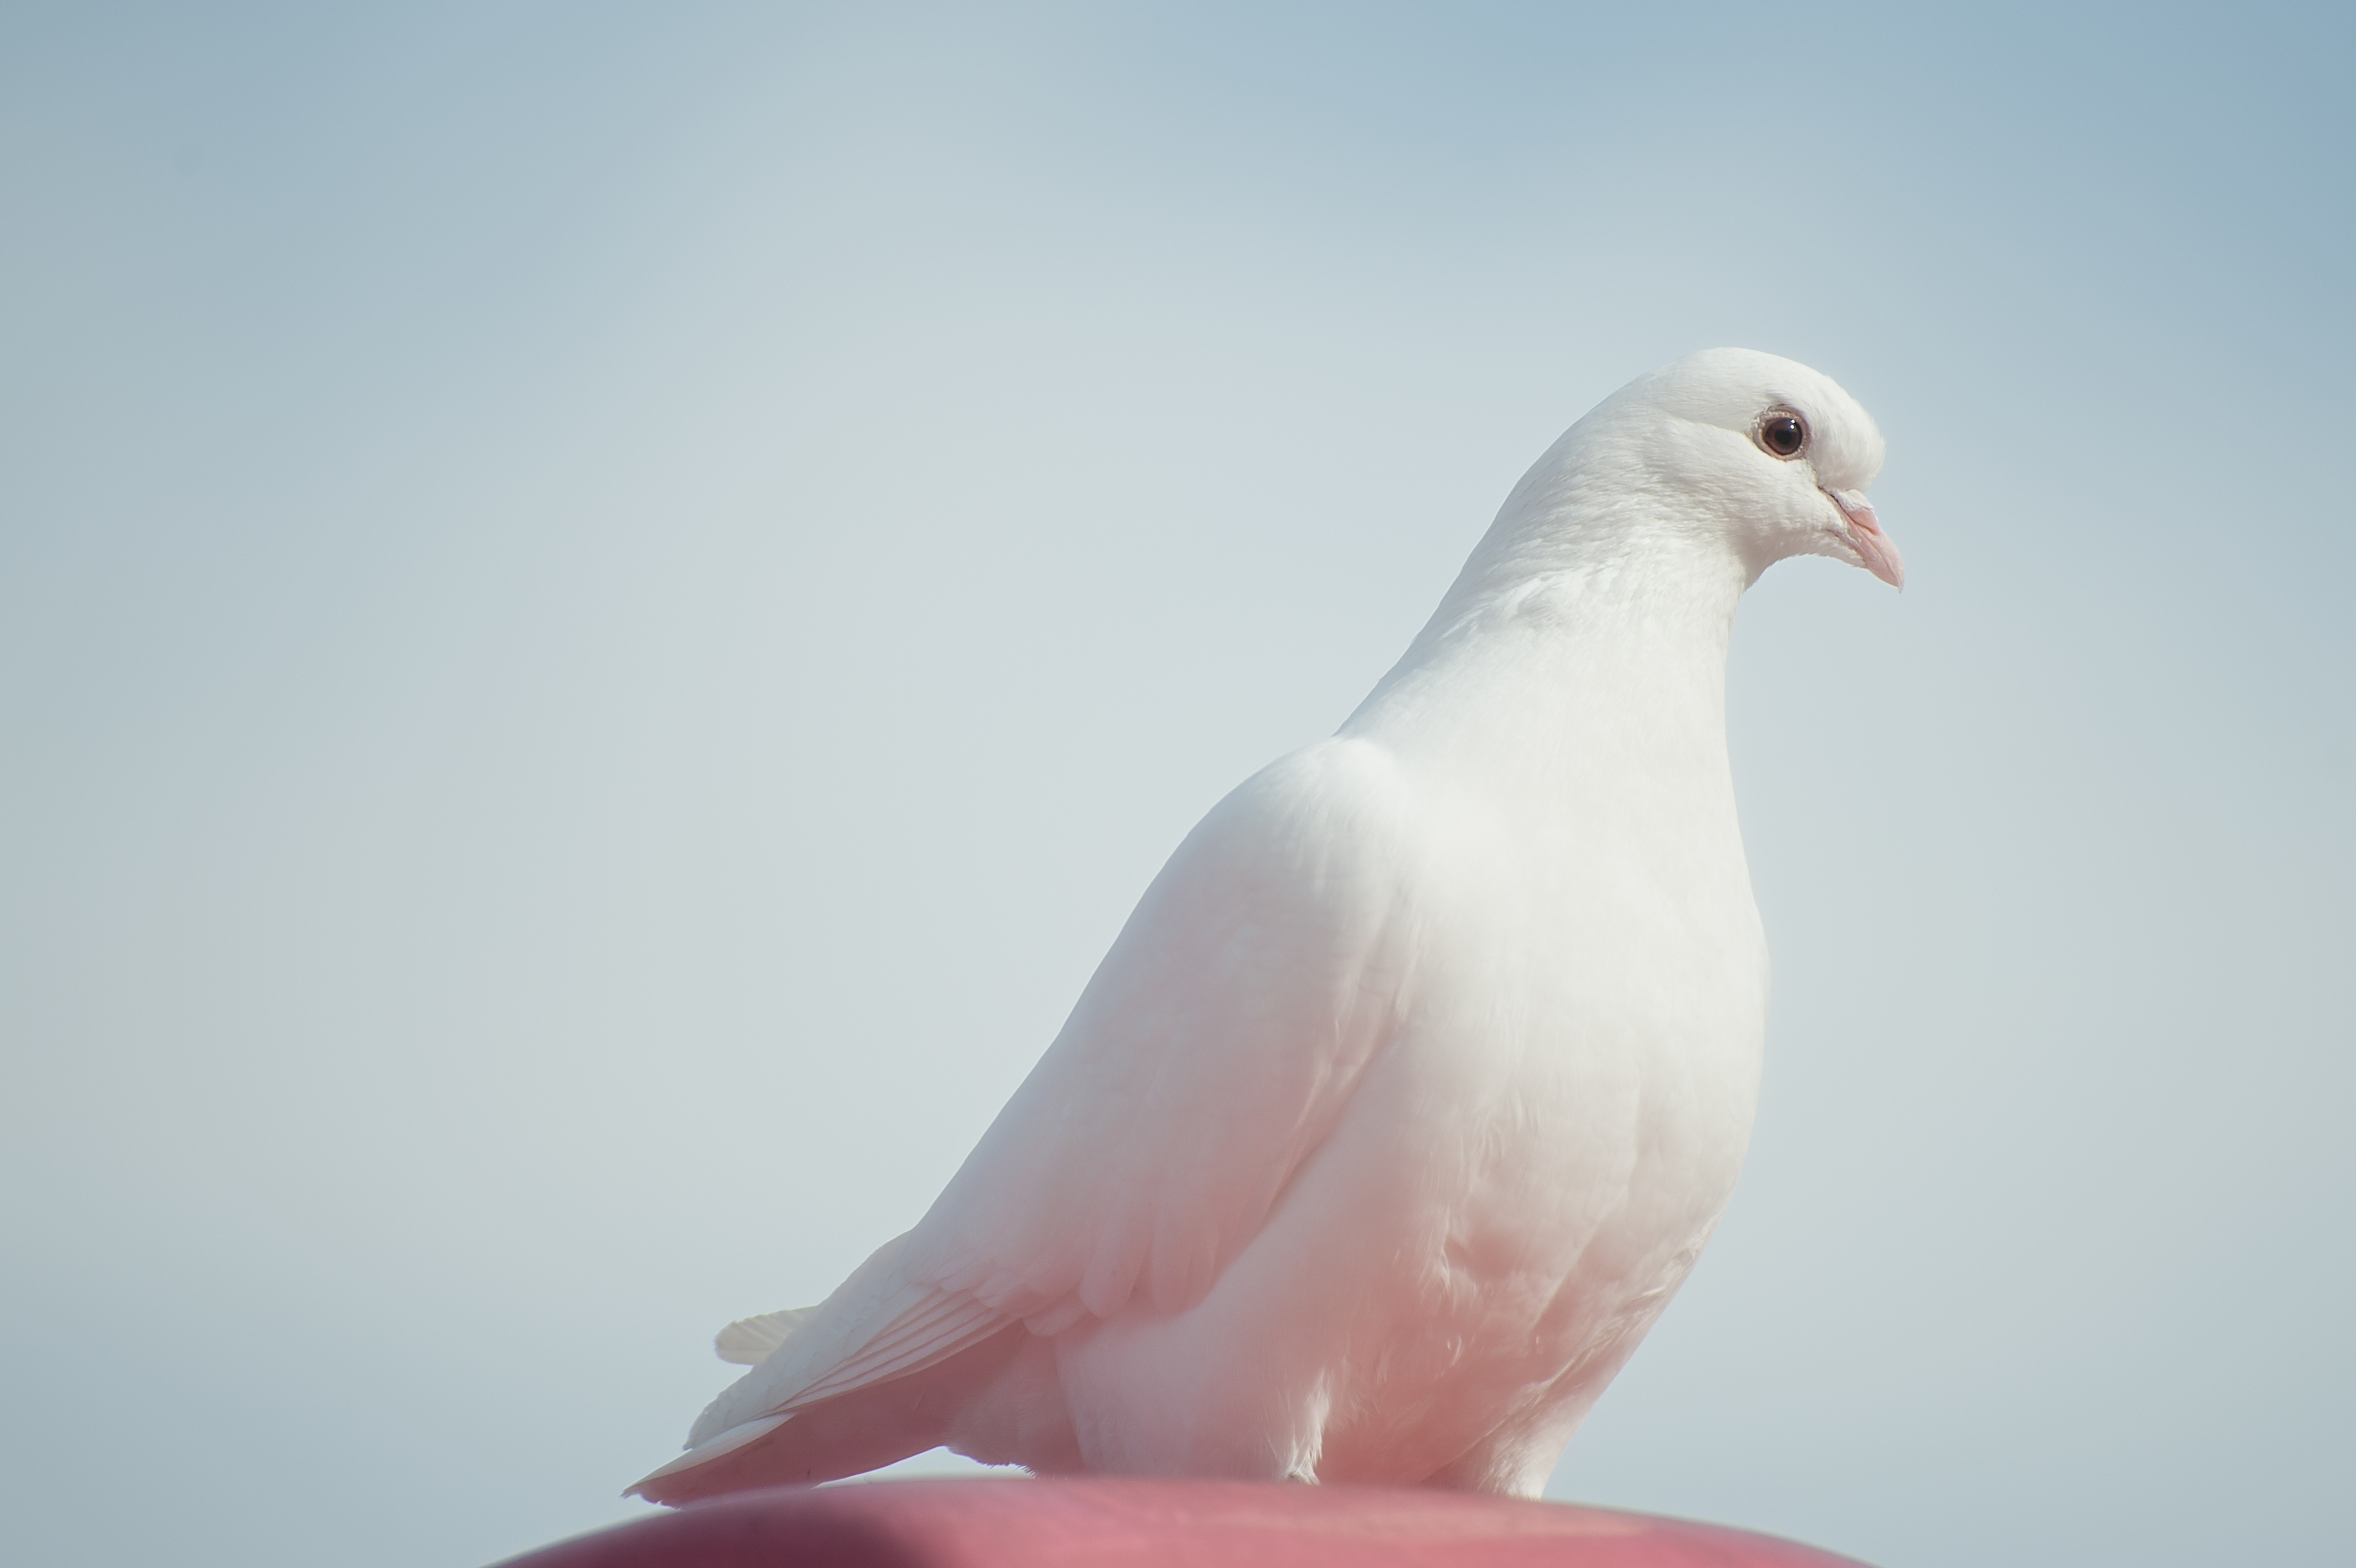 The Holy Spirit is as a dove